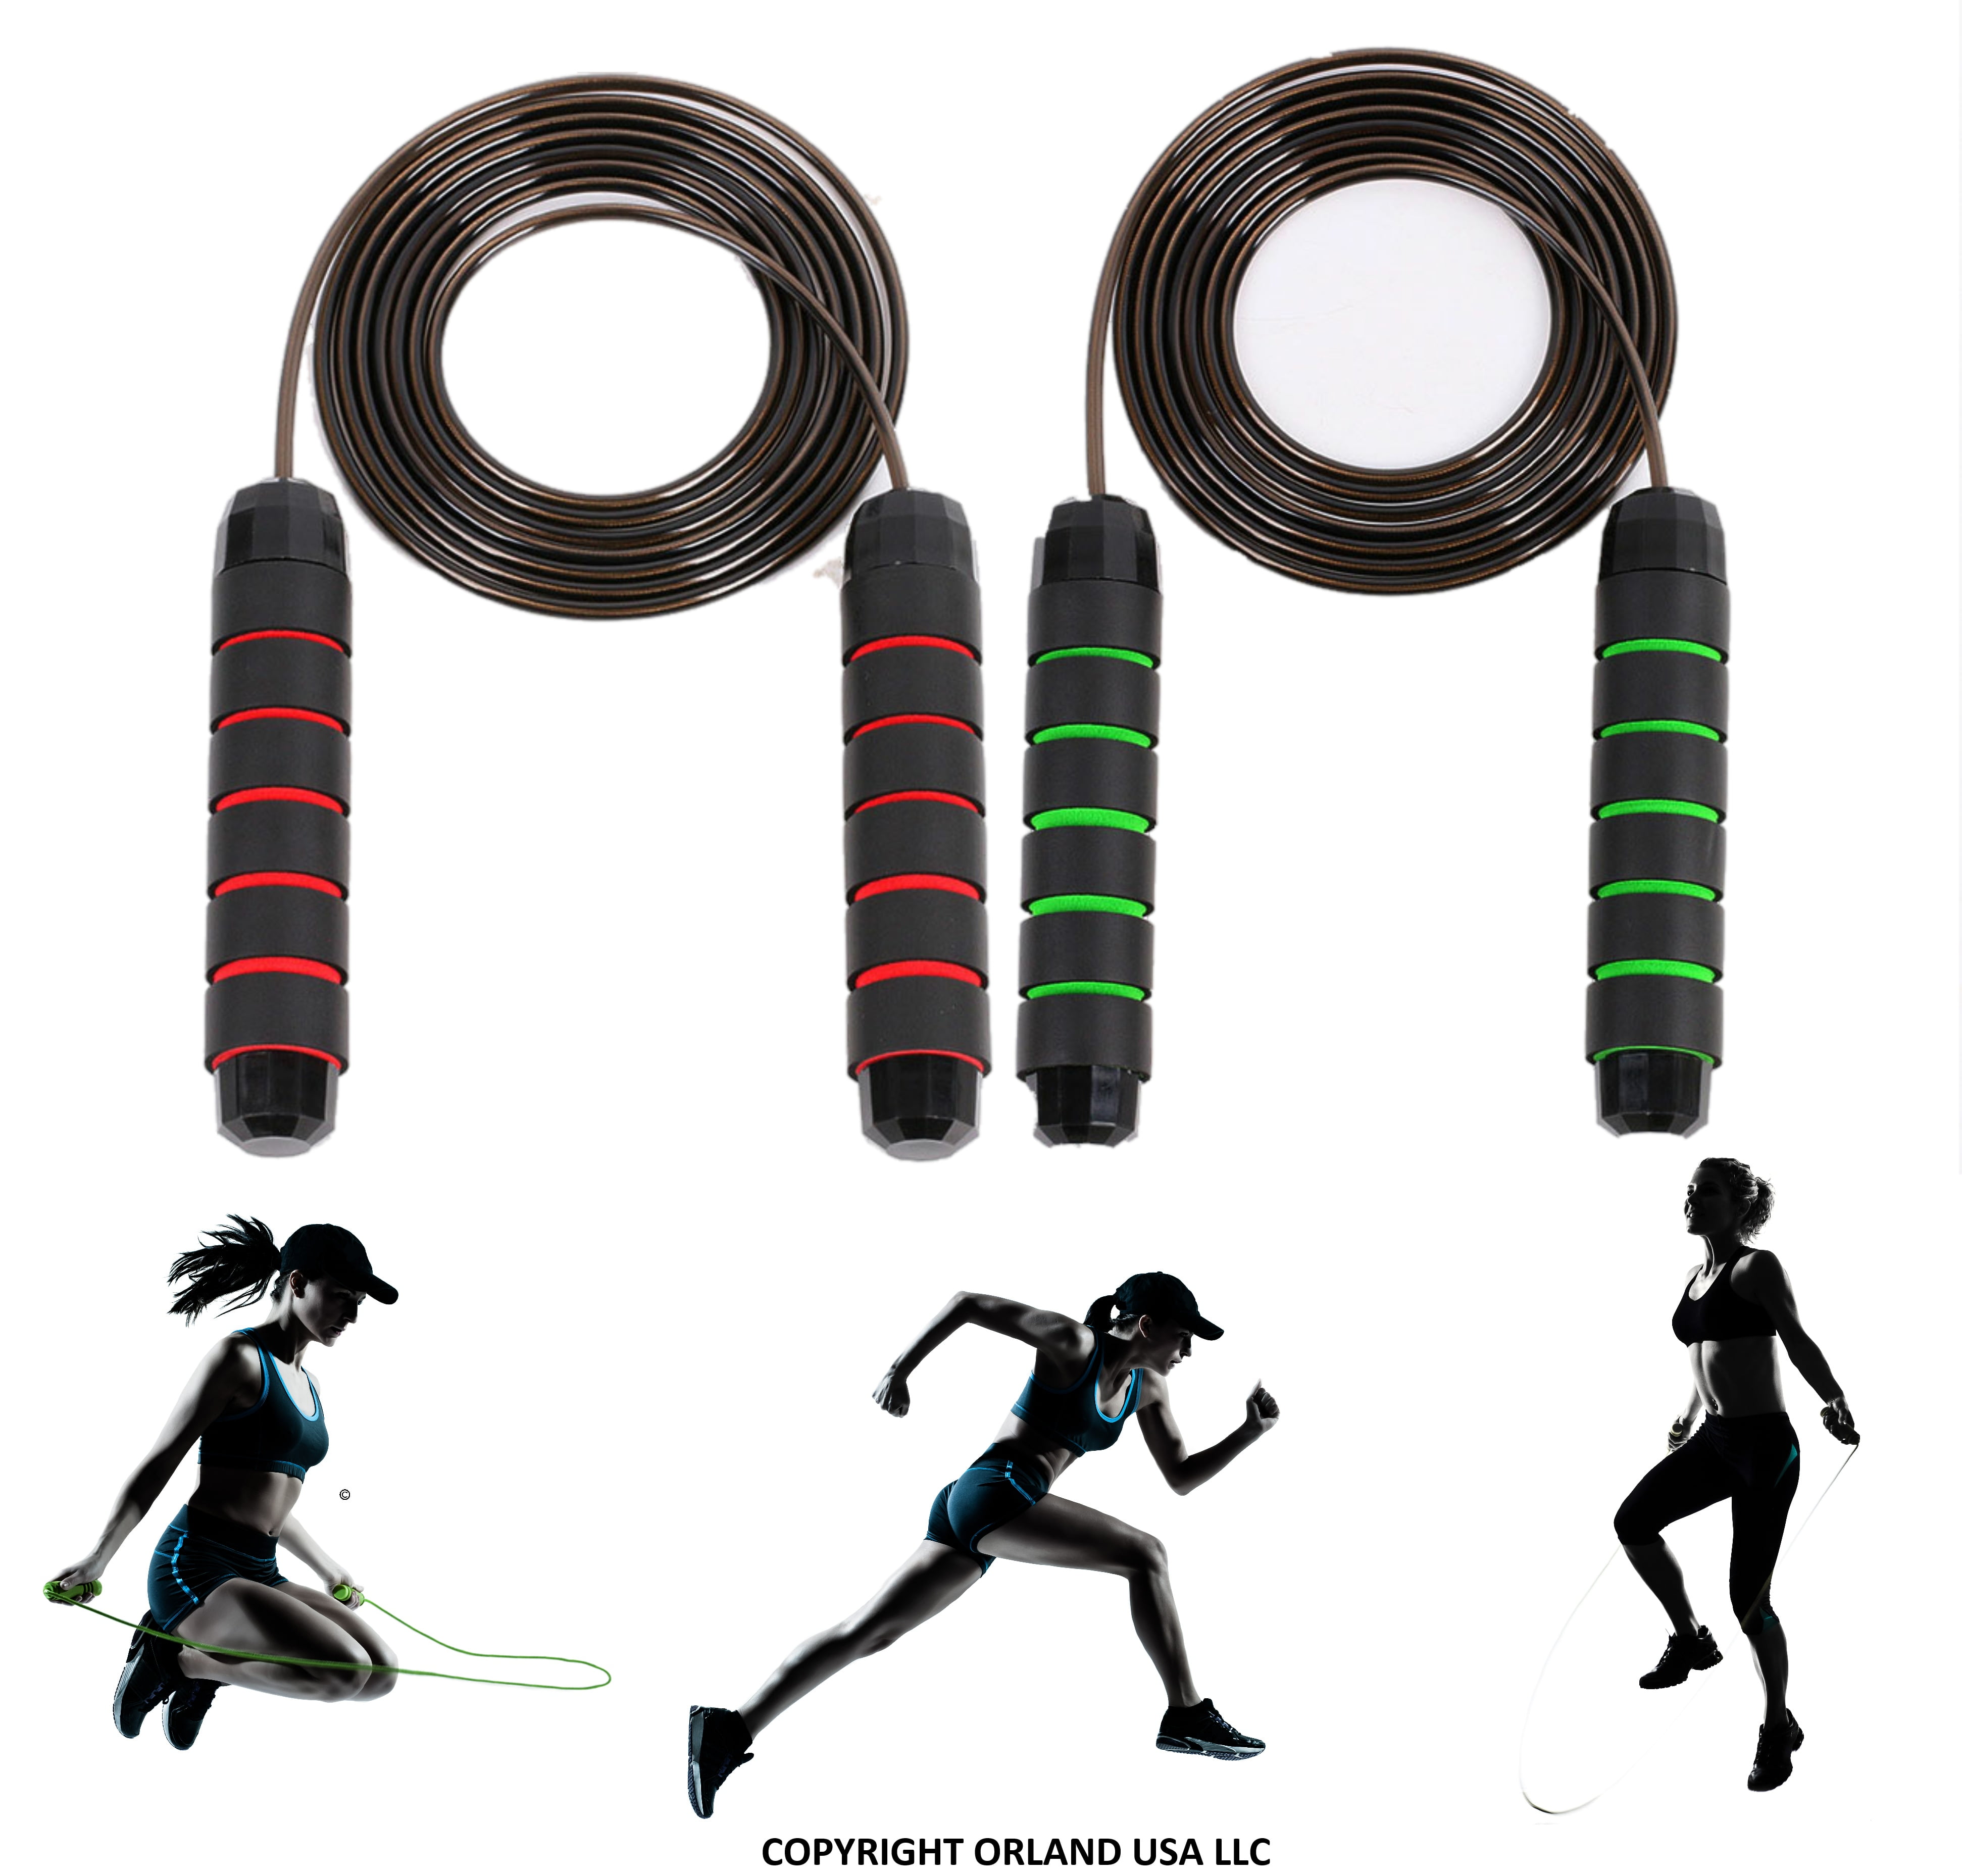 Mornex 2Pack-Skipping Rope,Tangle-Free with Ball Bearing Cable Speed Jump Rope and Memory Foam Handles,Men,Women and Kids,Suitable for Aerobic Exercise,Exercise Fitness